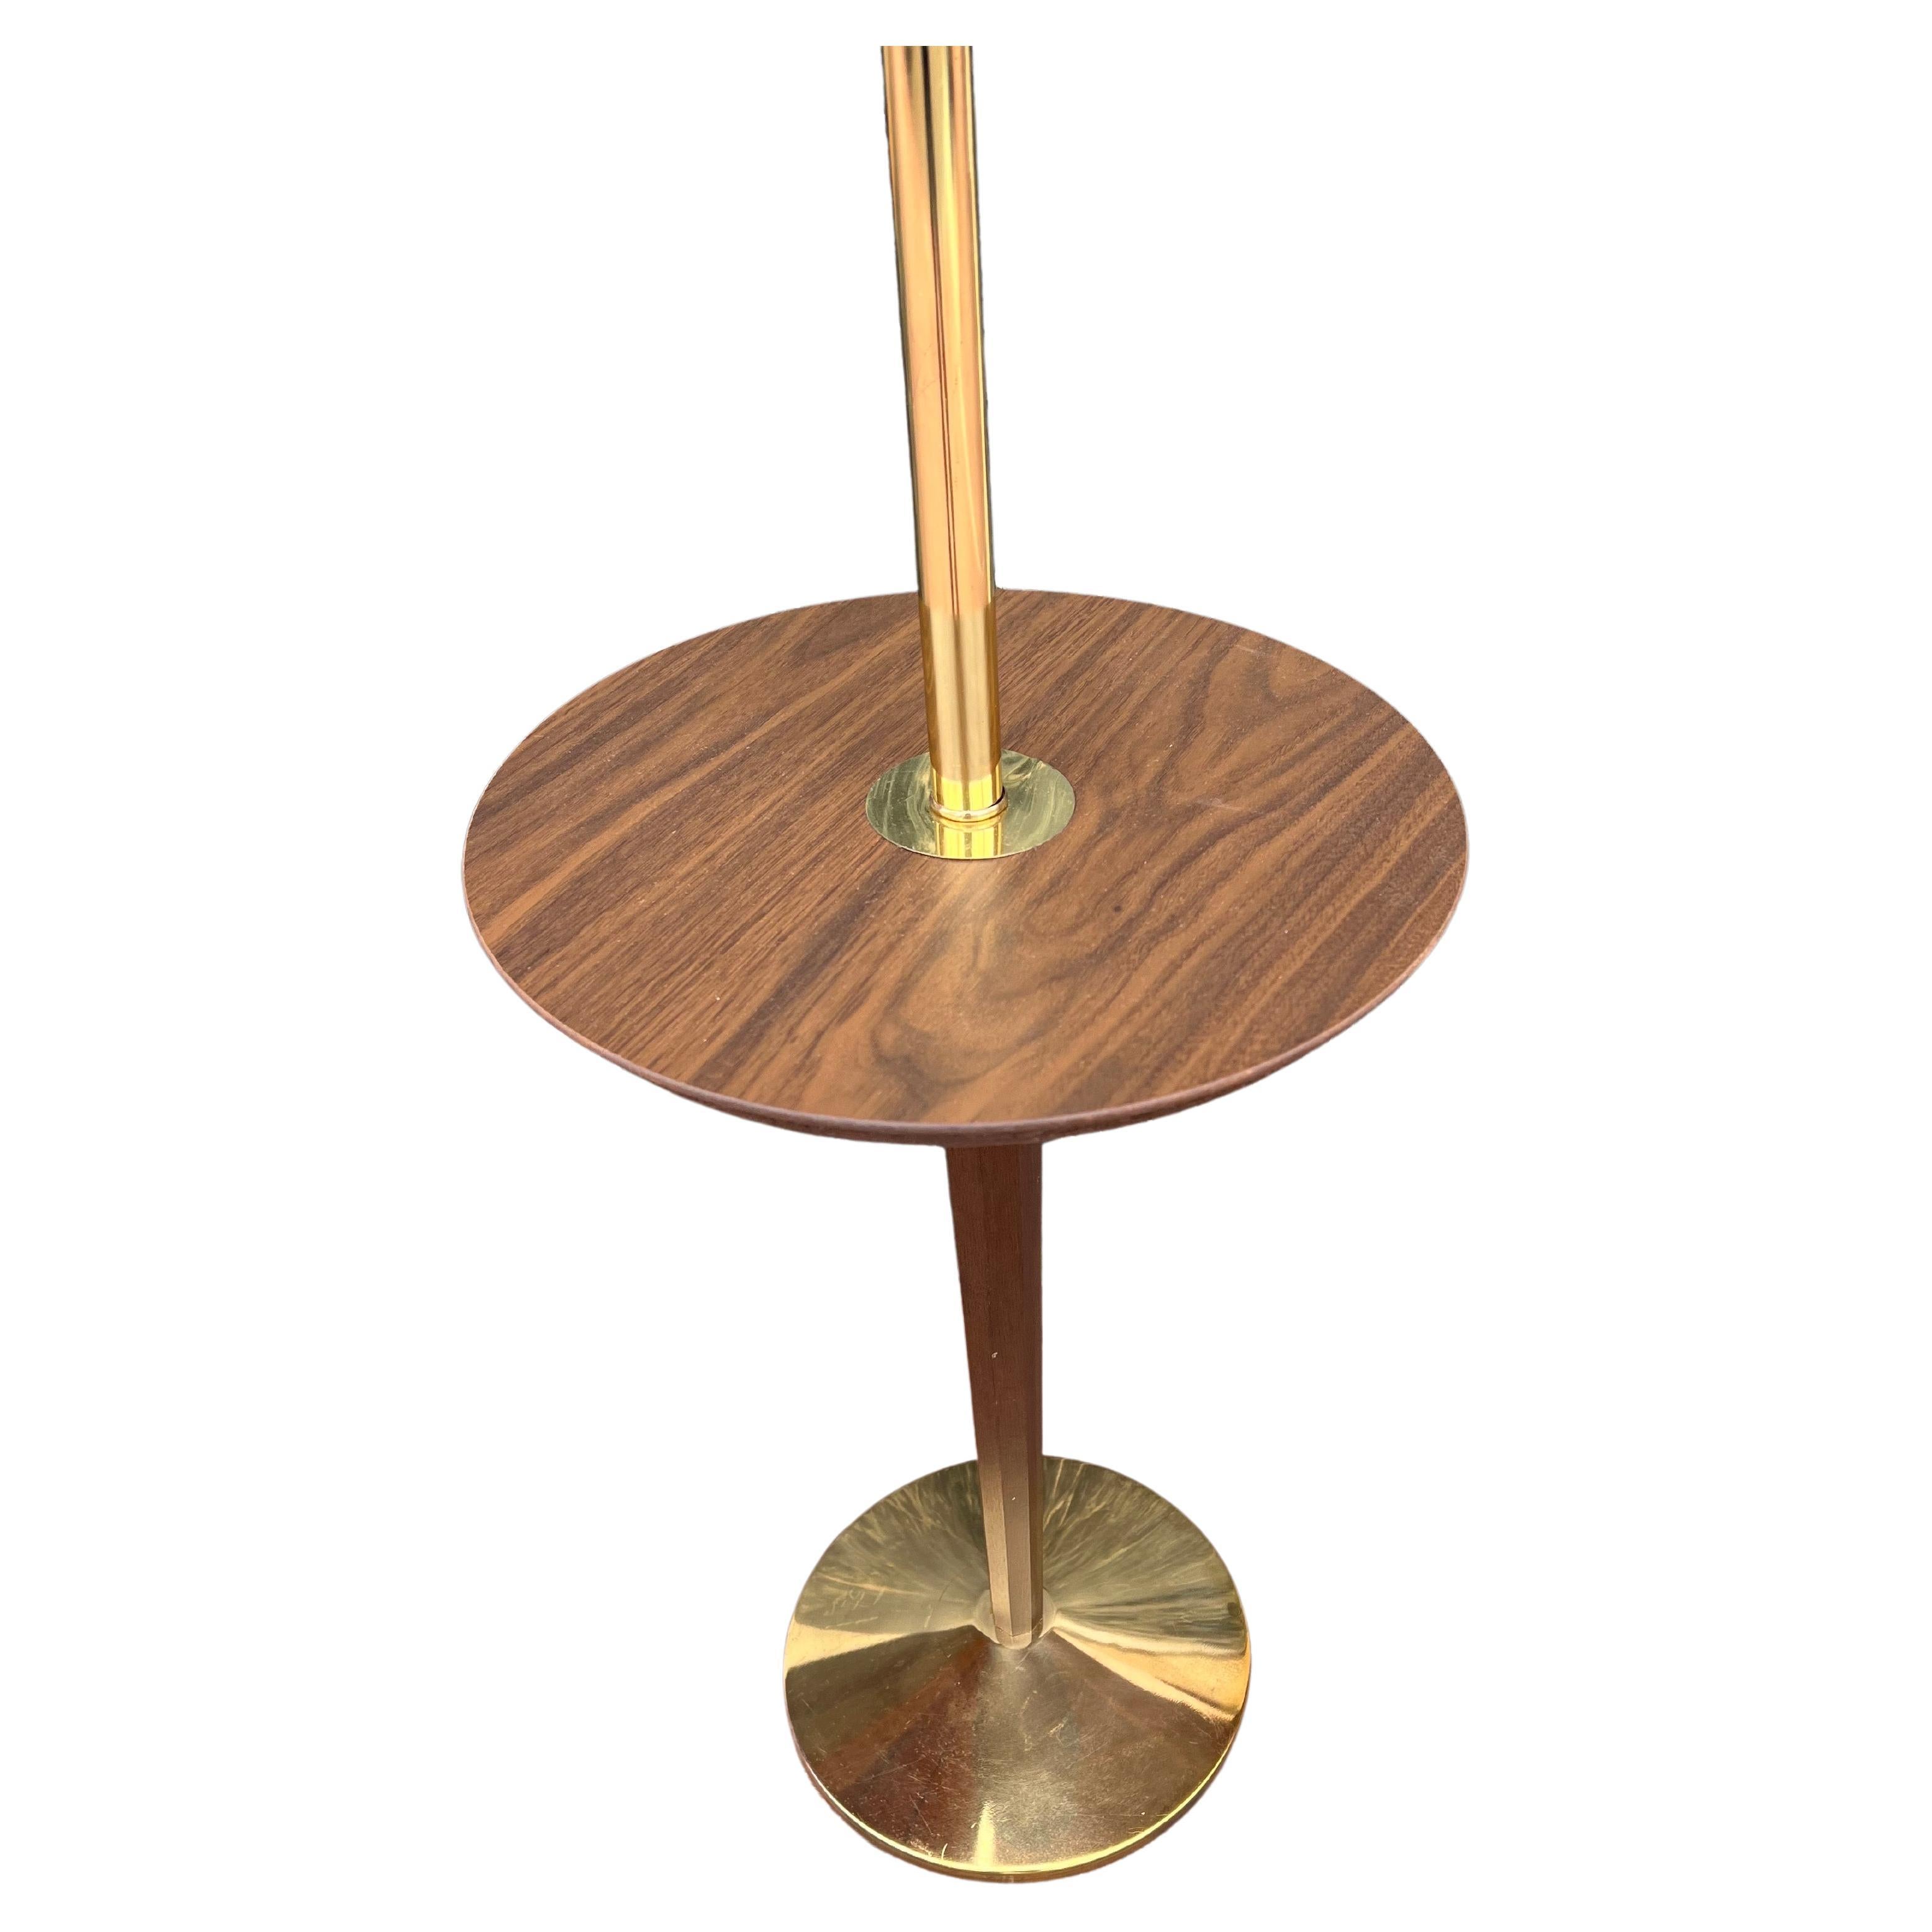 Simple Classic Mid-Century Modern atomic age floor table lamp, circa 1950s in excellent condition probably never used the brass its beautiful and has a nice walnut laminate top with a nice solid walnut base, made by Wolfe creations of California,